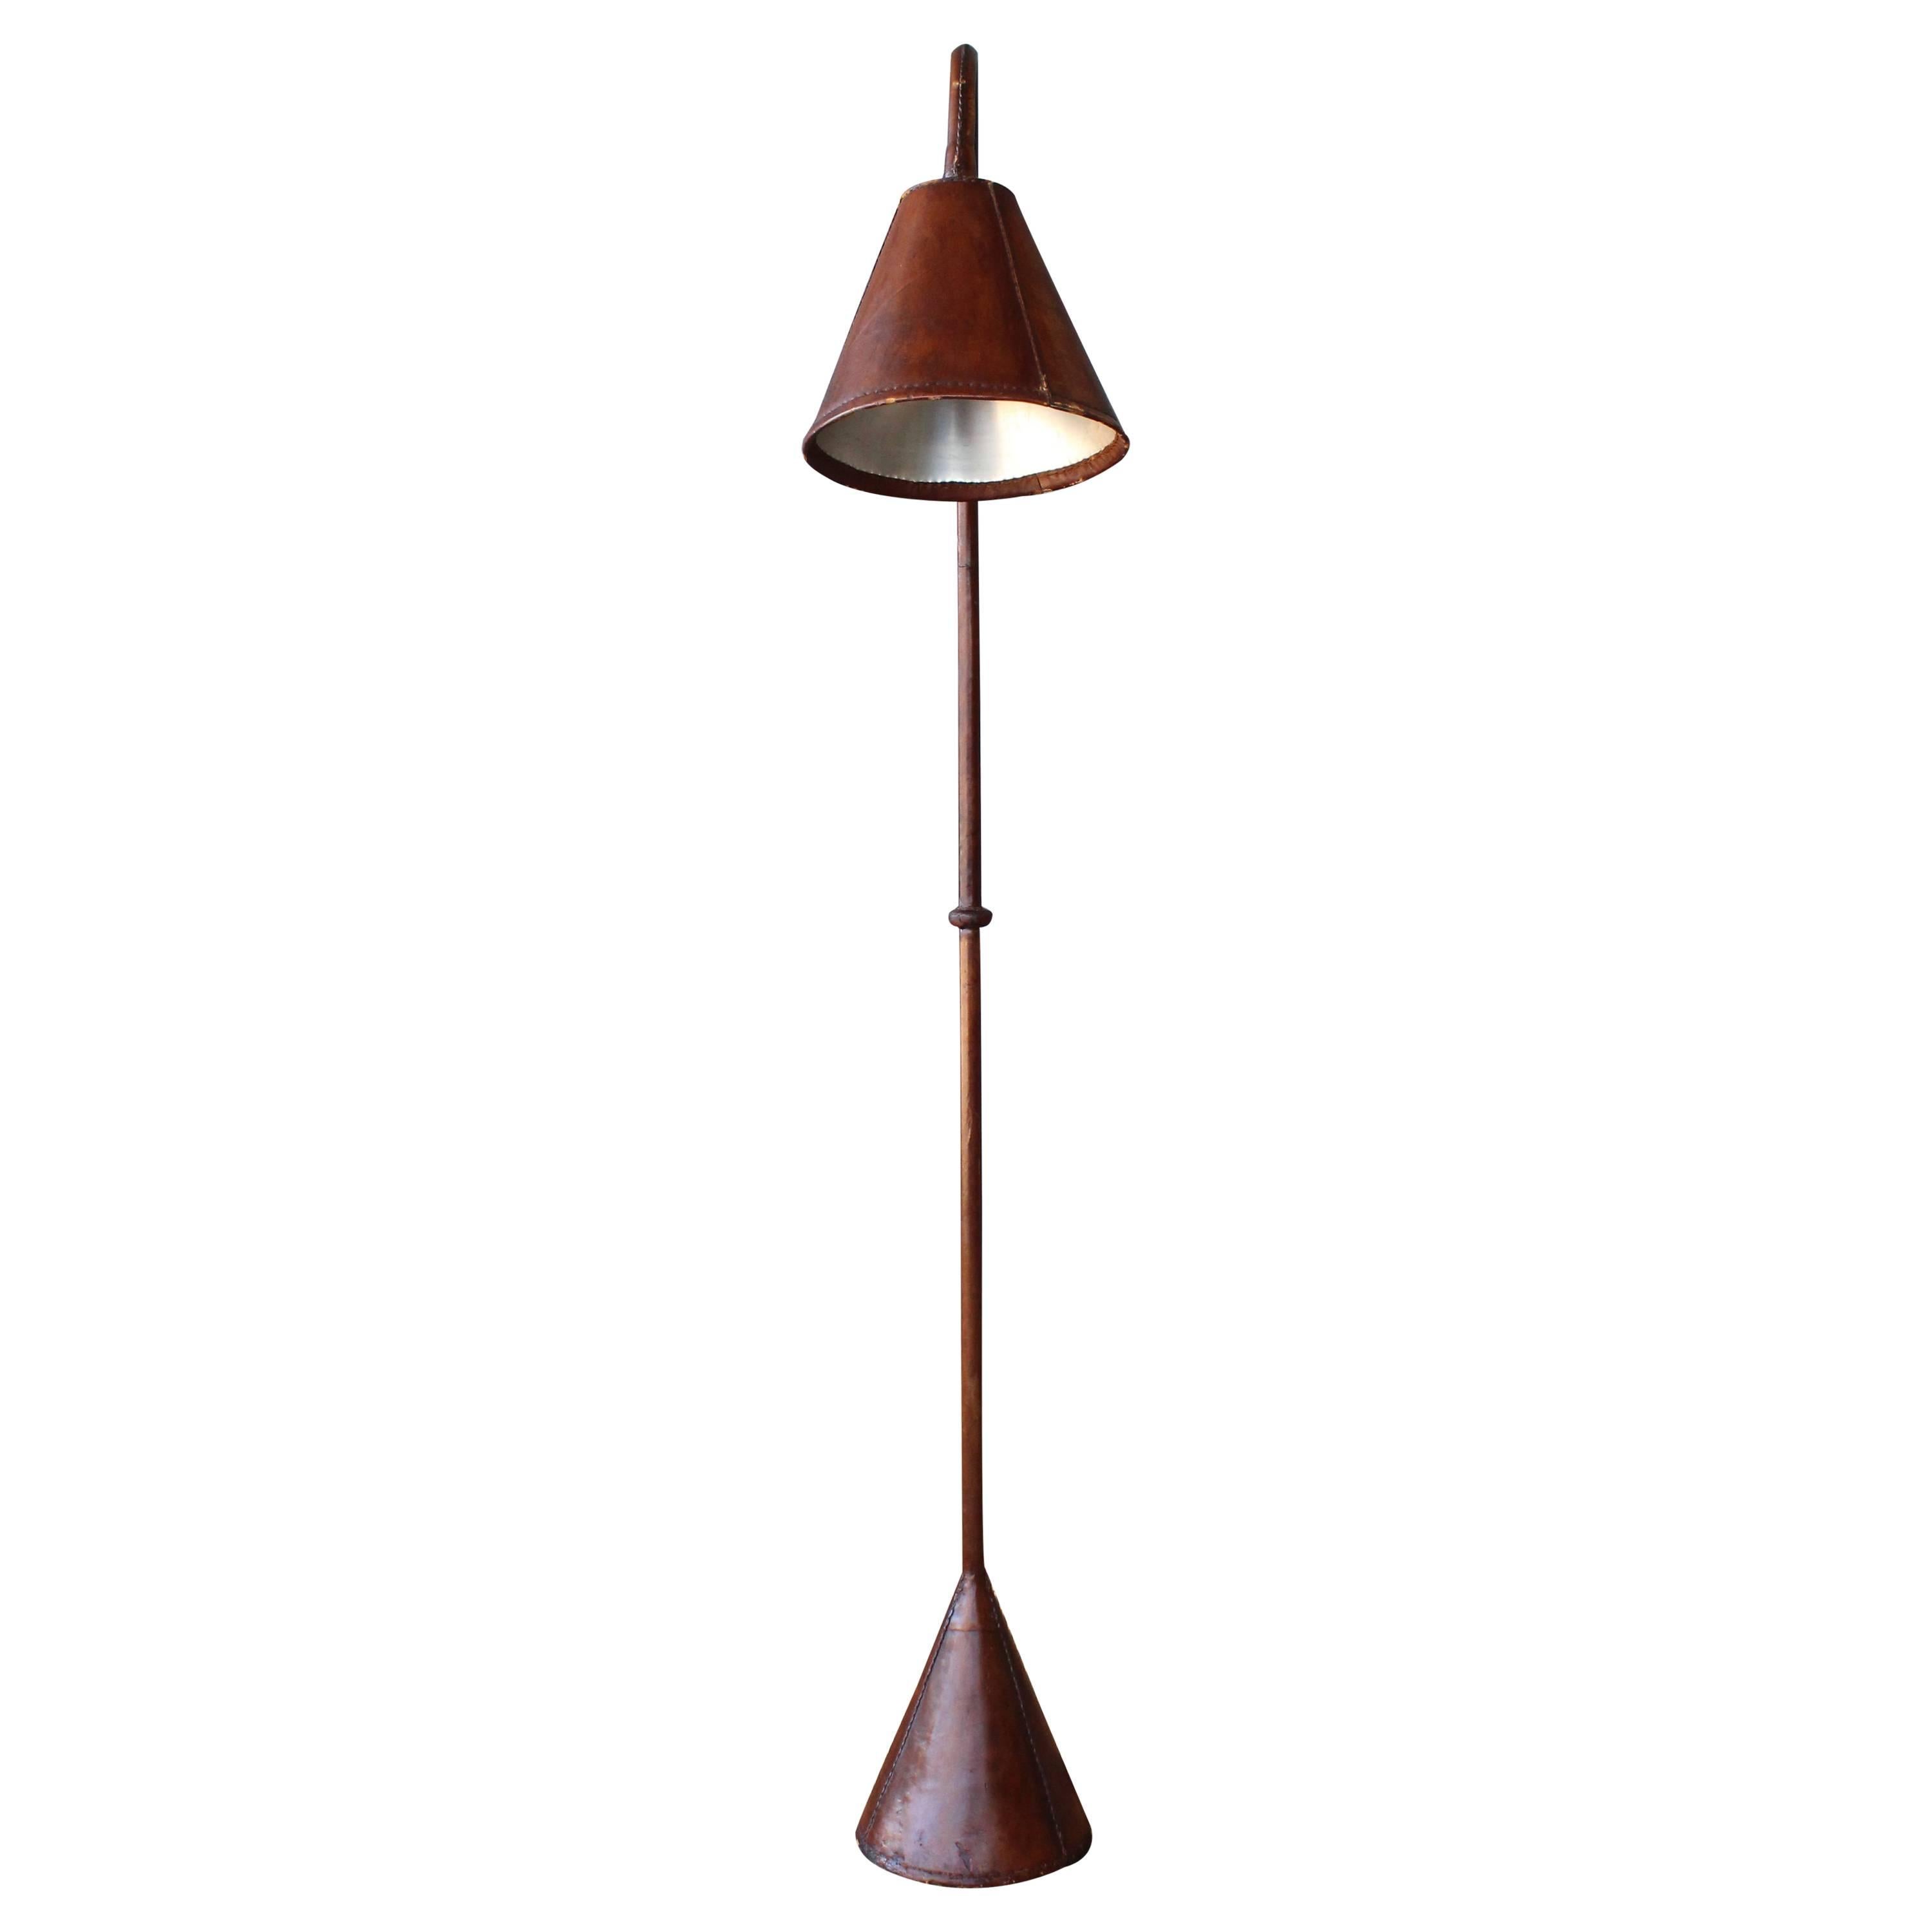 Leather Wrapped Floor Lamp by Valenti, Spain